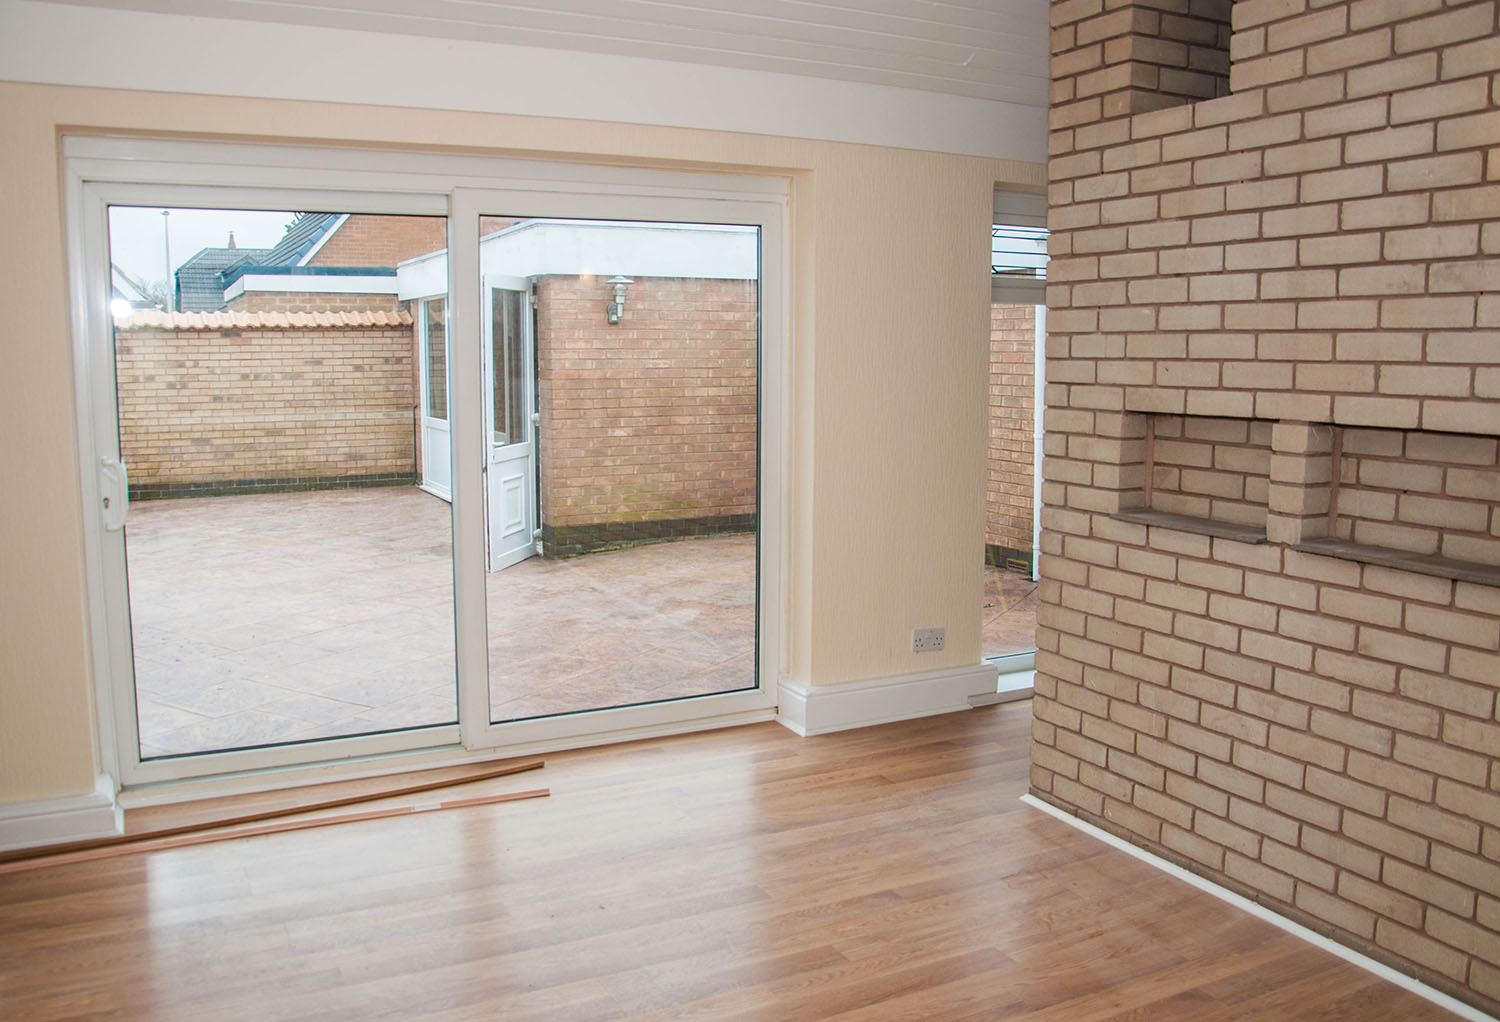 Living room with bricked wall and wooden floors and sliding doors opening out into the patio area